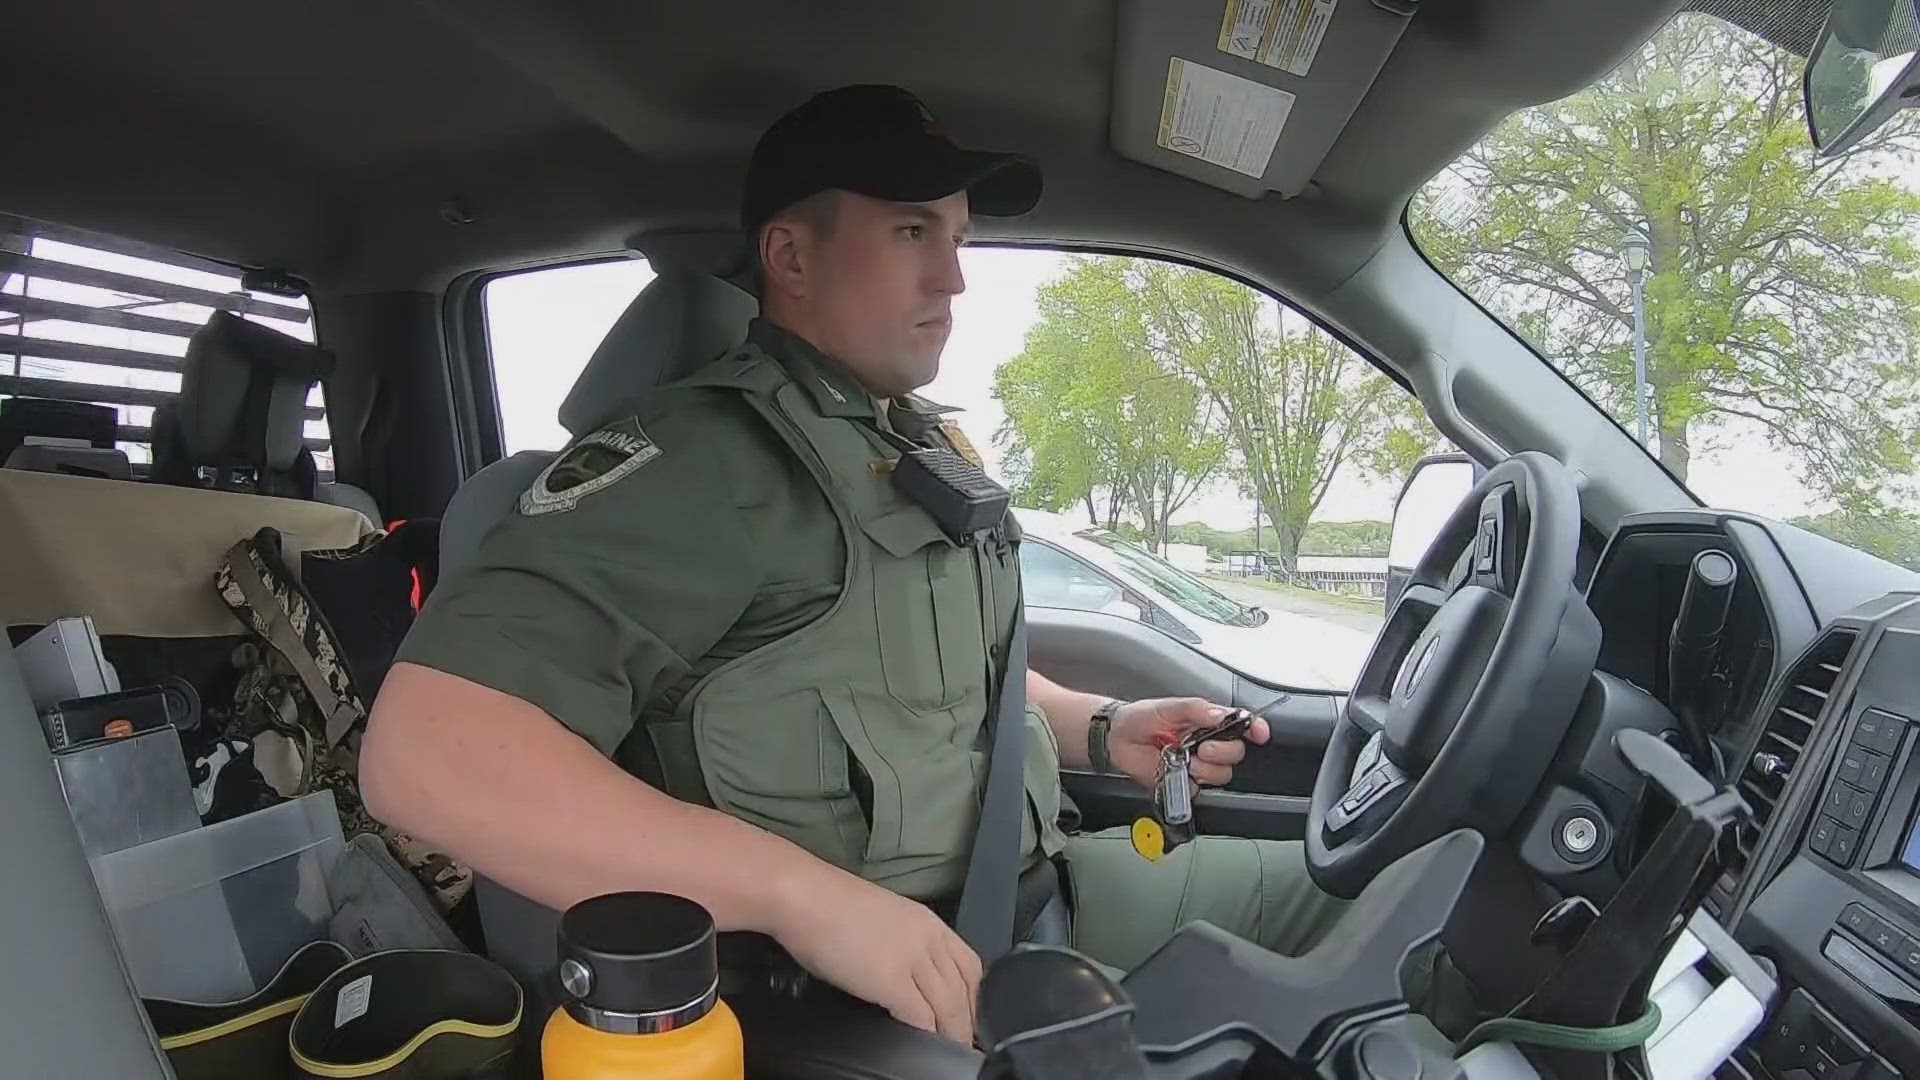 Although life took him in some different directions, the Mainer eventually found his way to become a game warden.